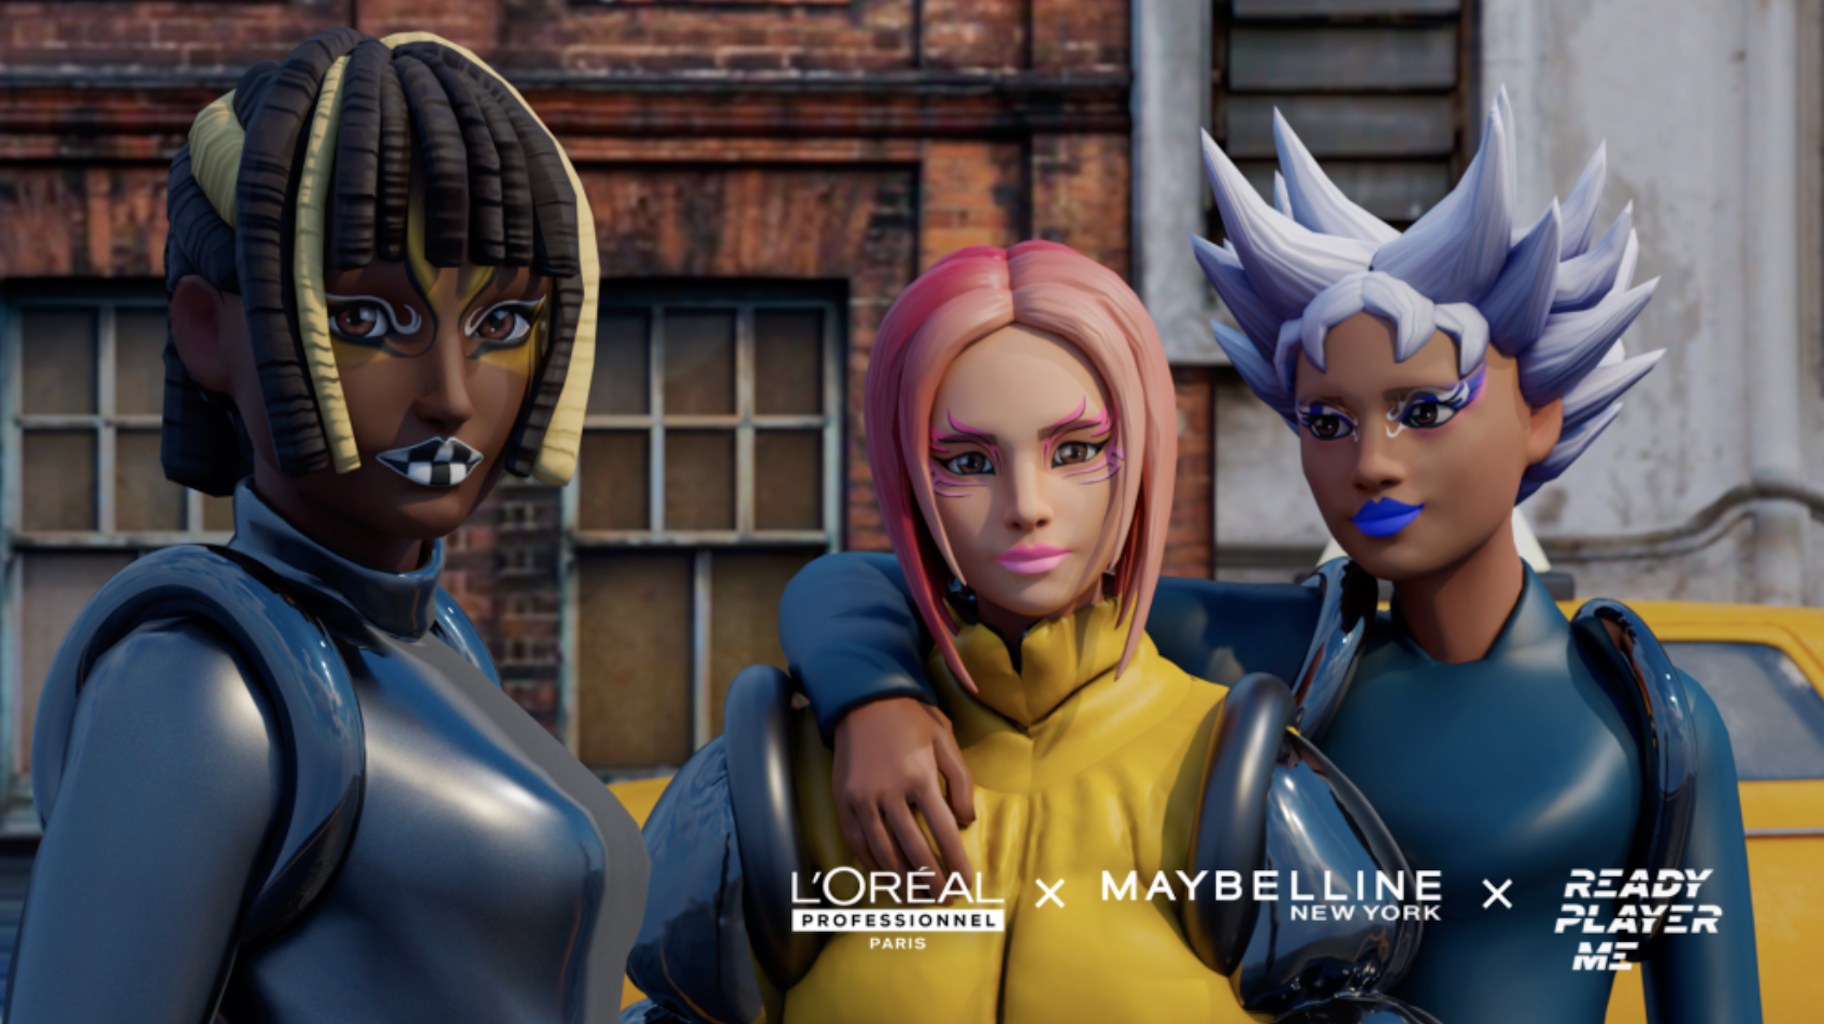 L’Oréal teams up with Ready Player Me to launch beauty products in the metaverse